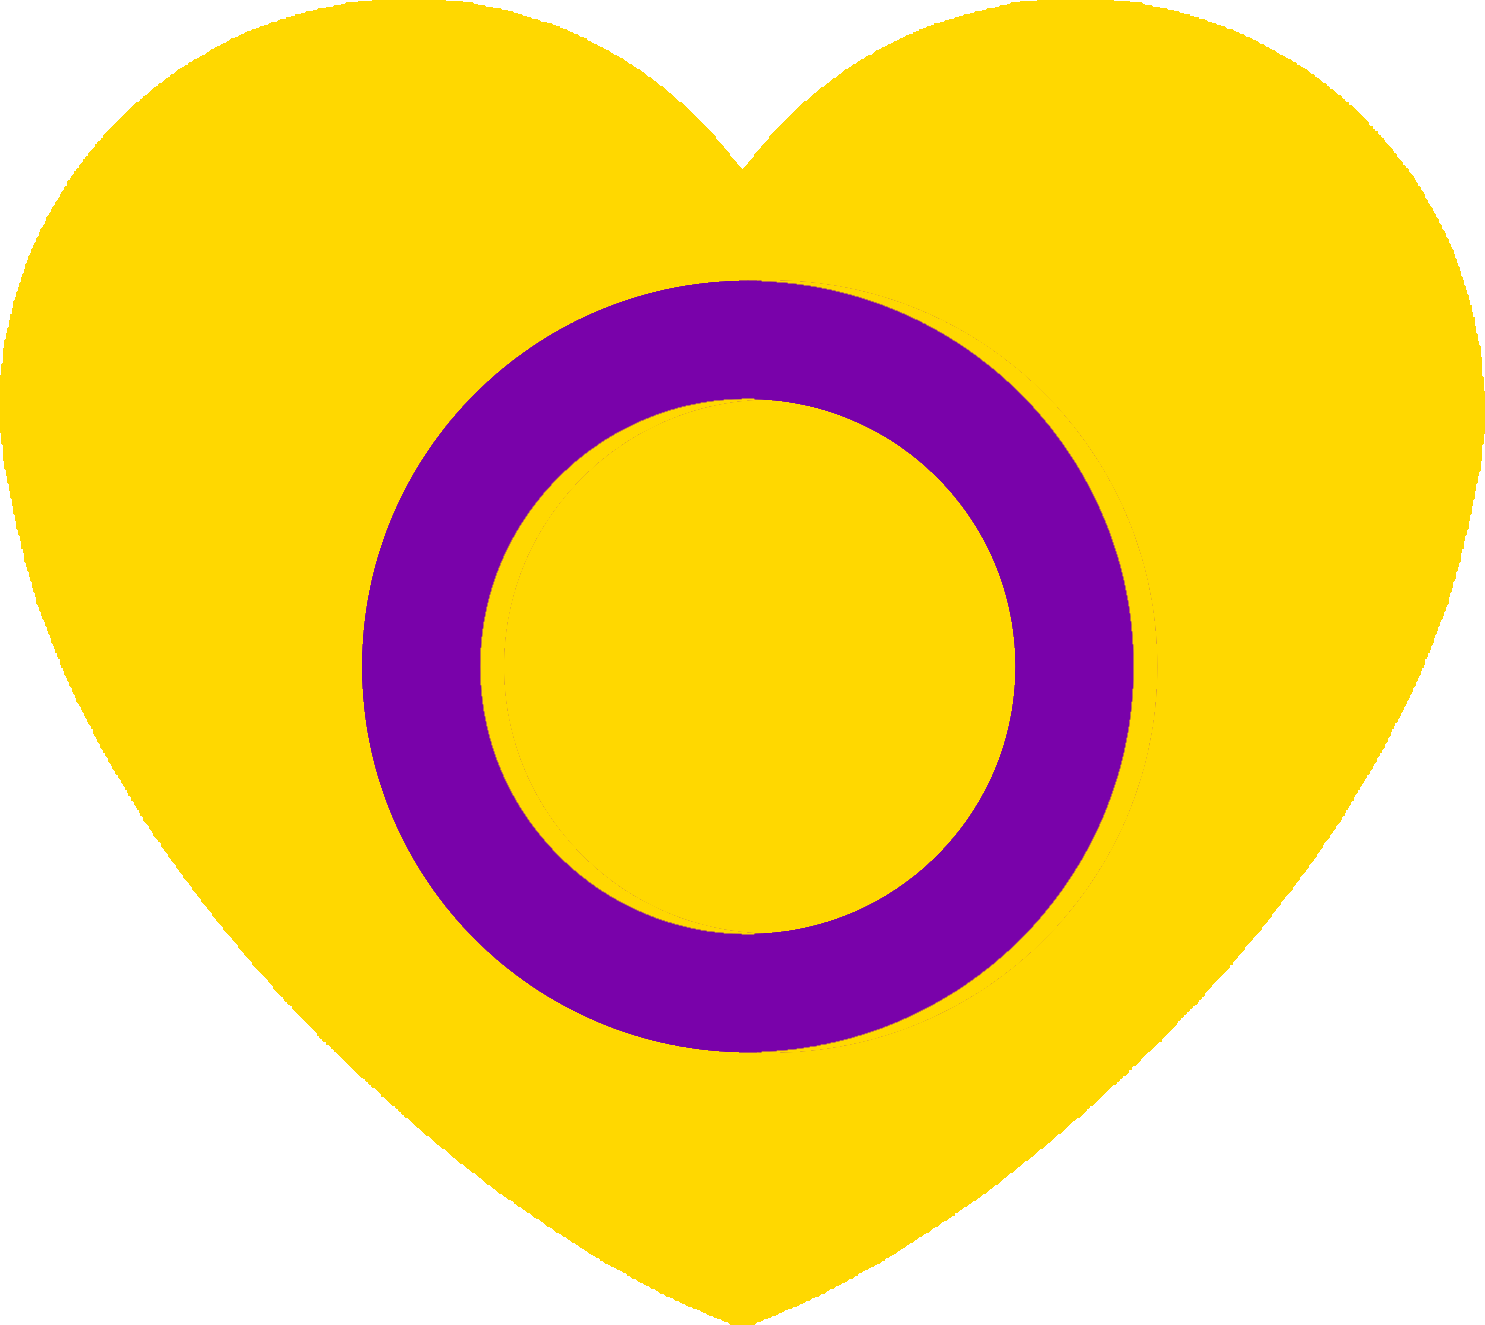 Yellow Heart With Purple Circle PNG image